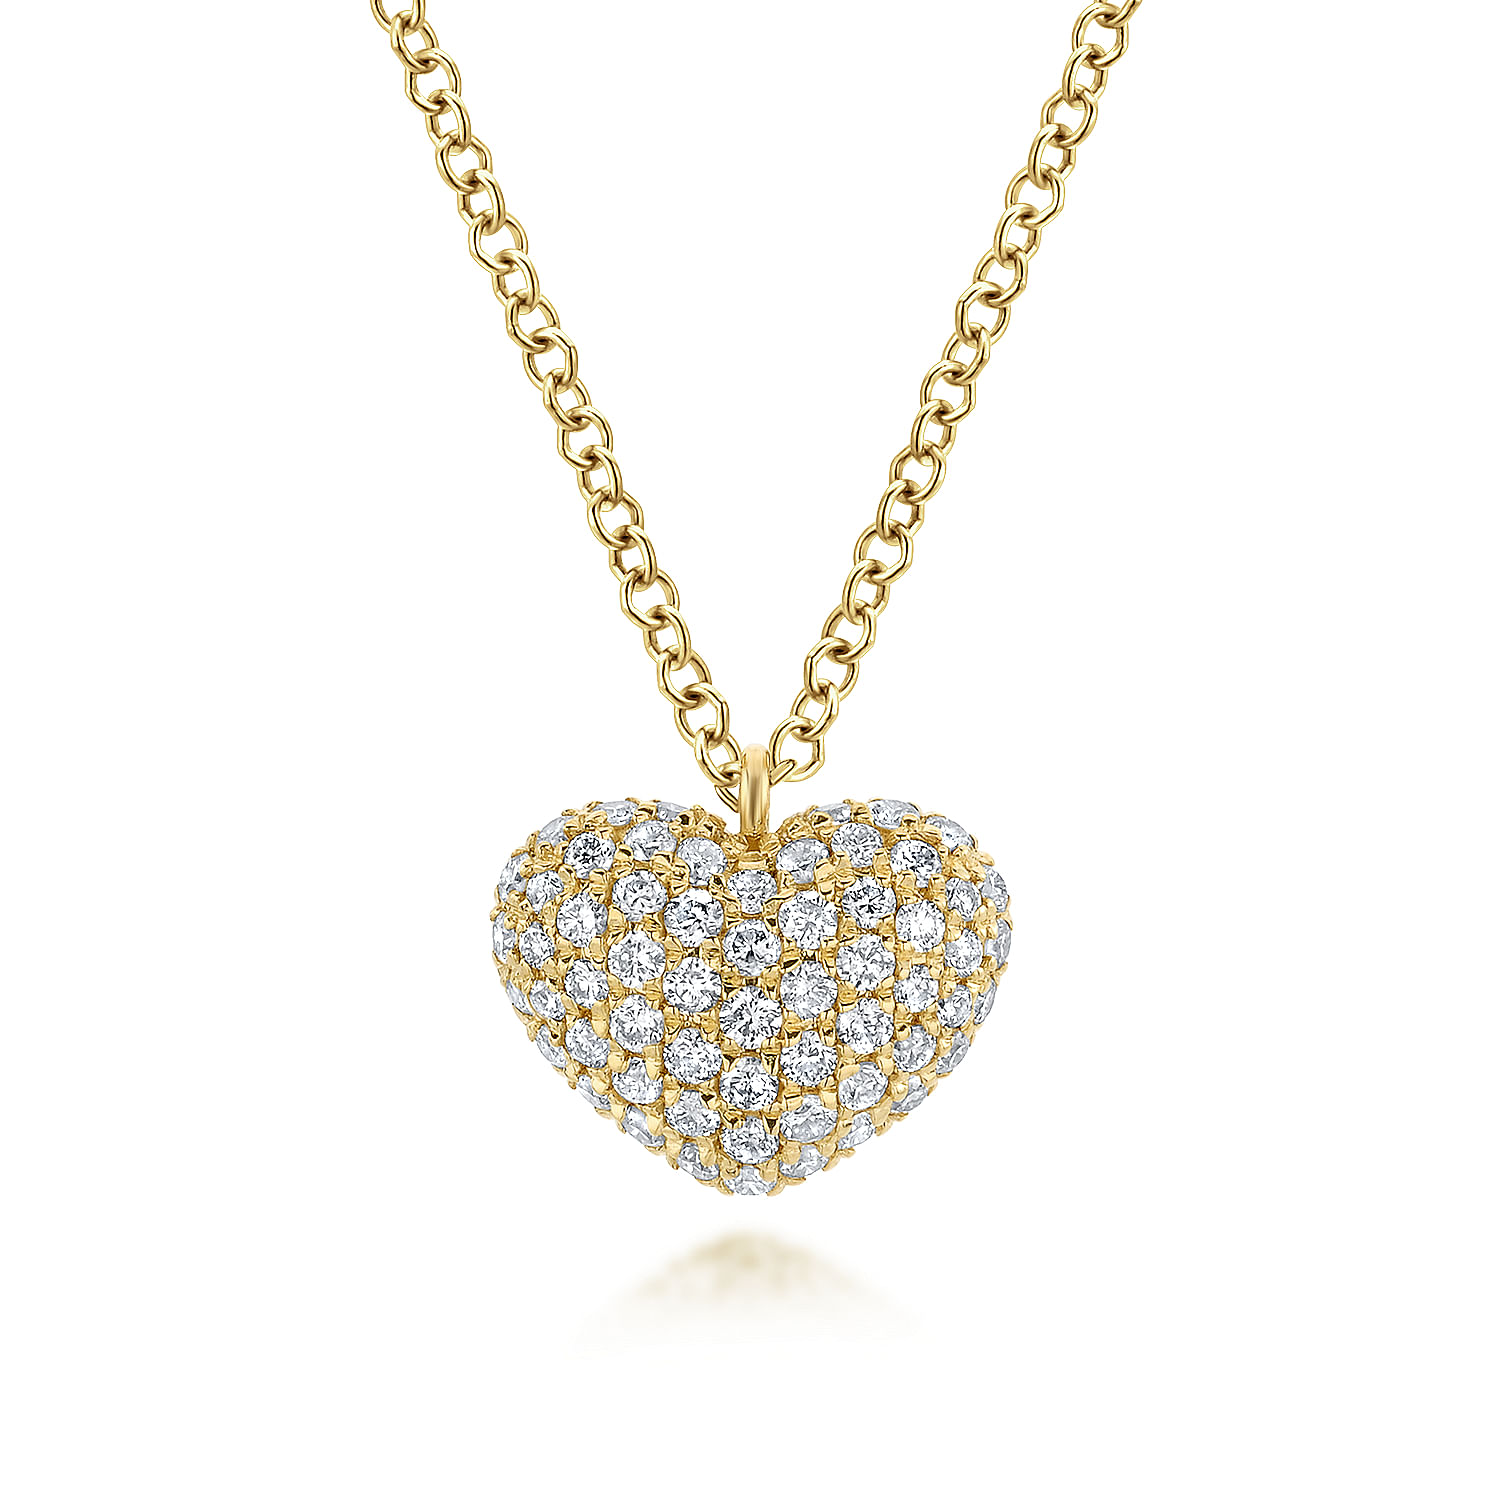 14K Yellow Gold Pave Diamond Encrusted Heart Necklace